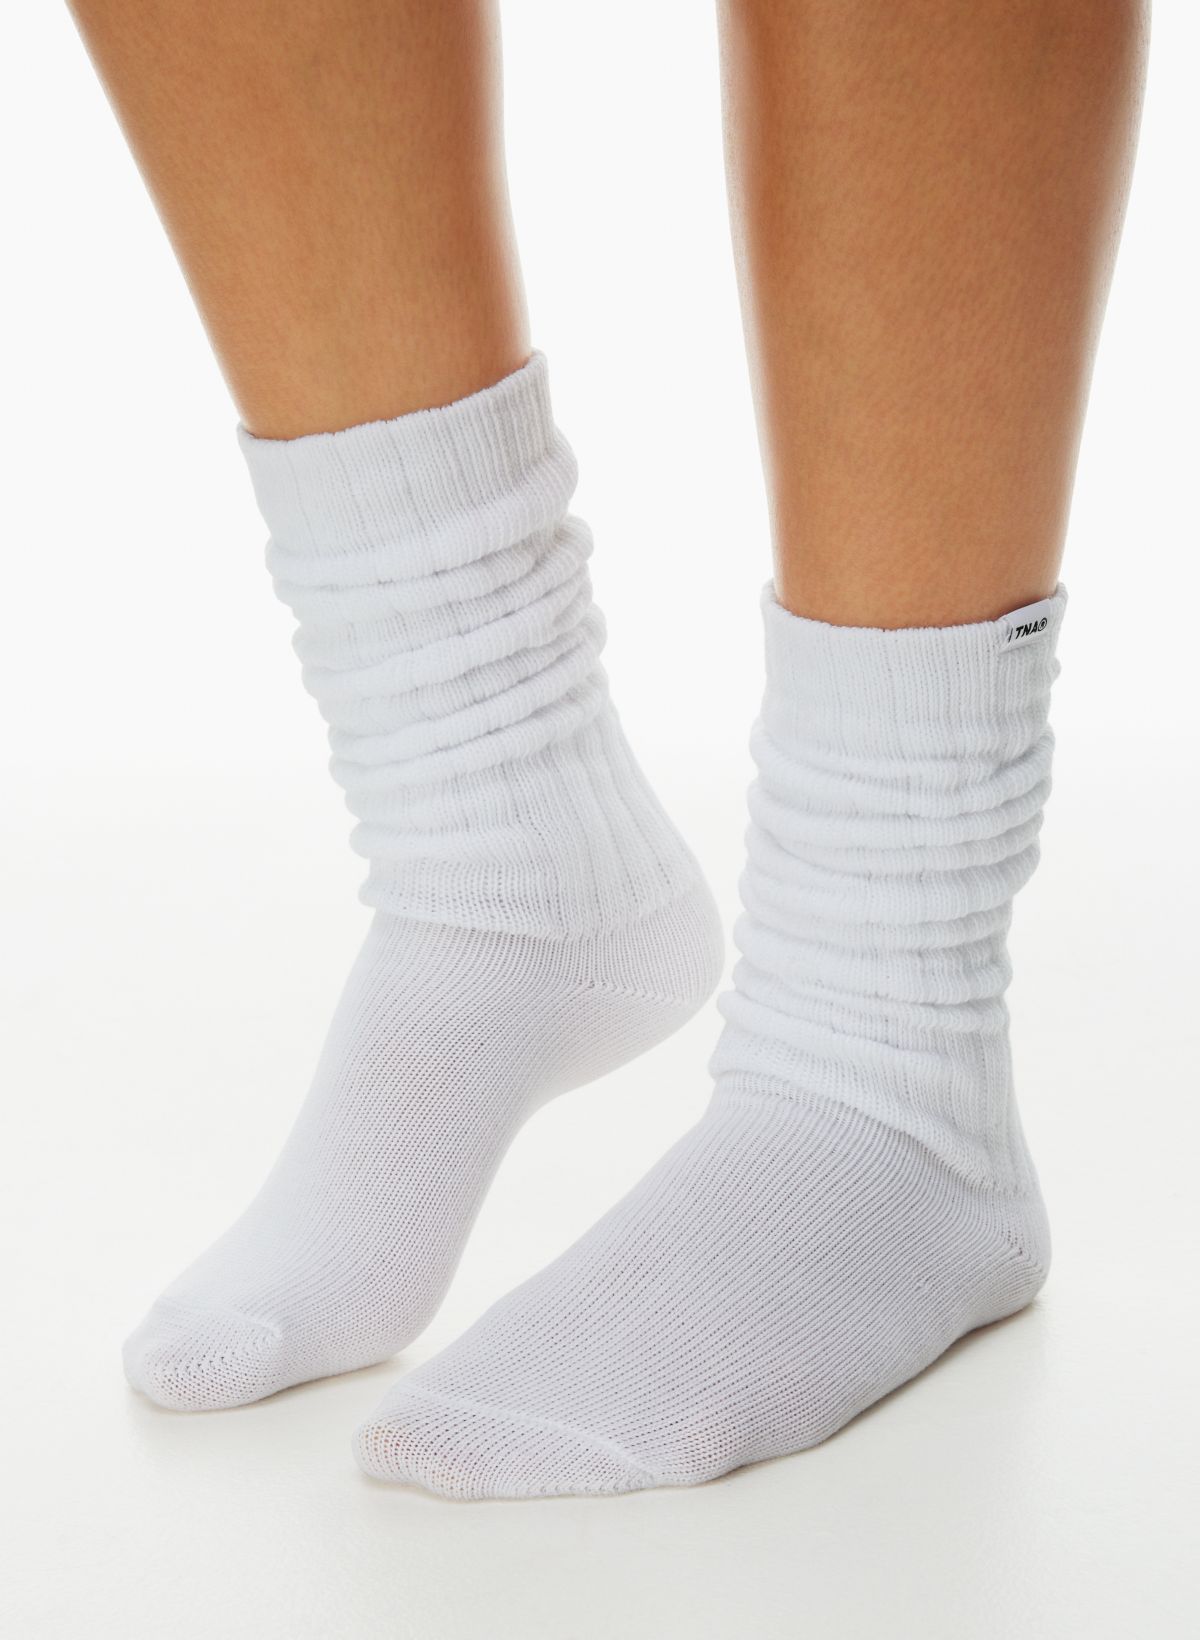 Slouchy Socks - Perfect White Slouch Sock